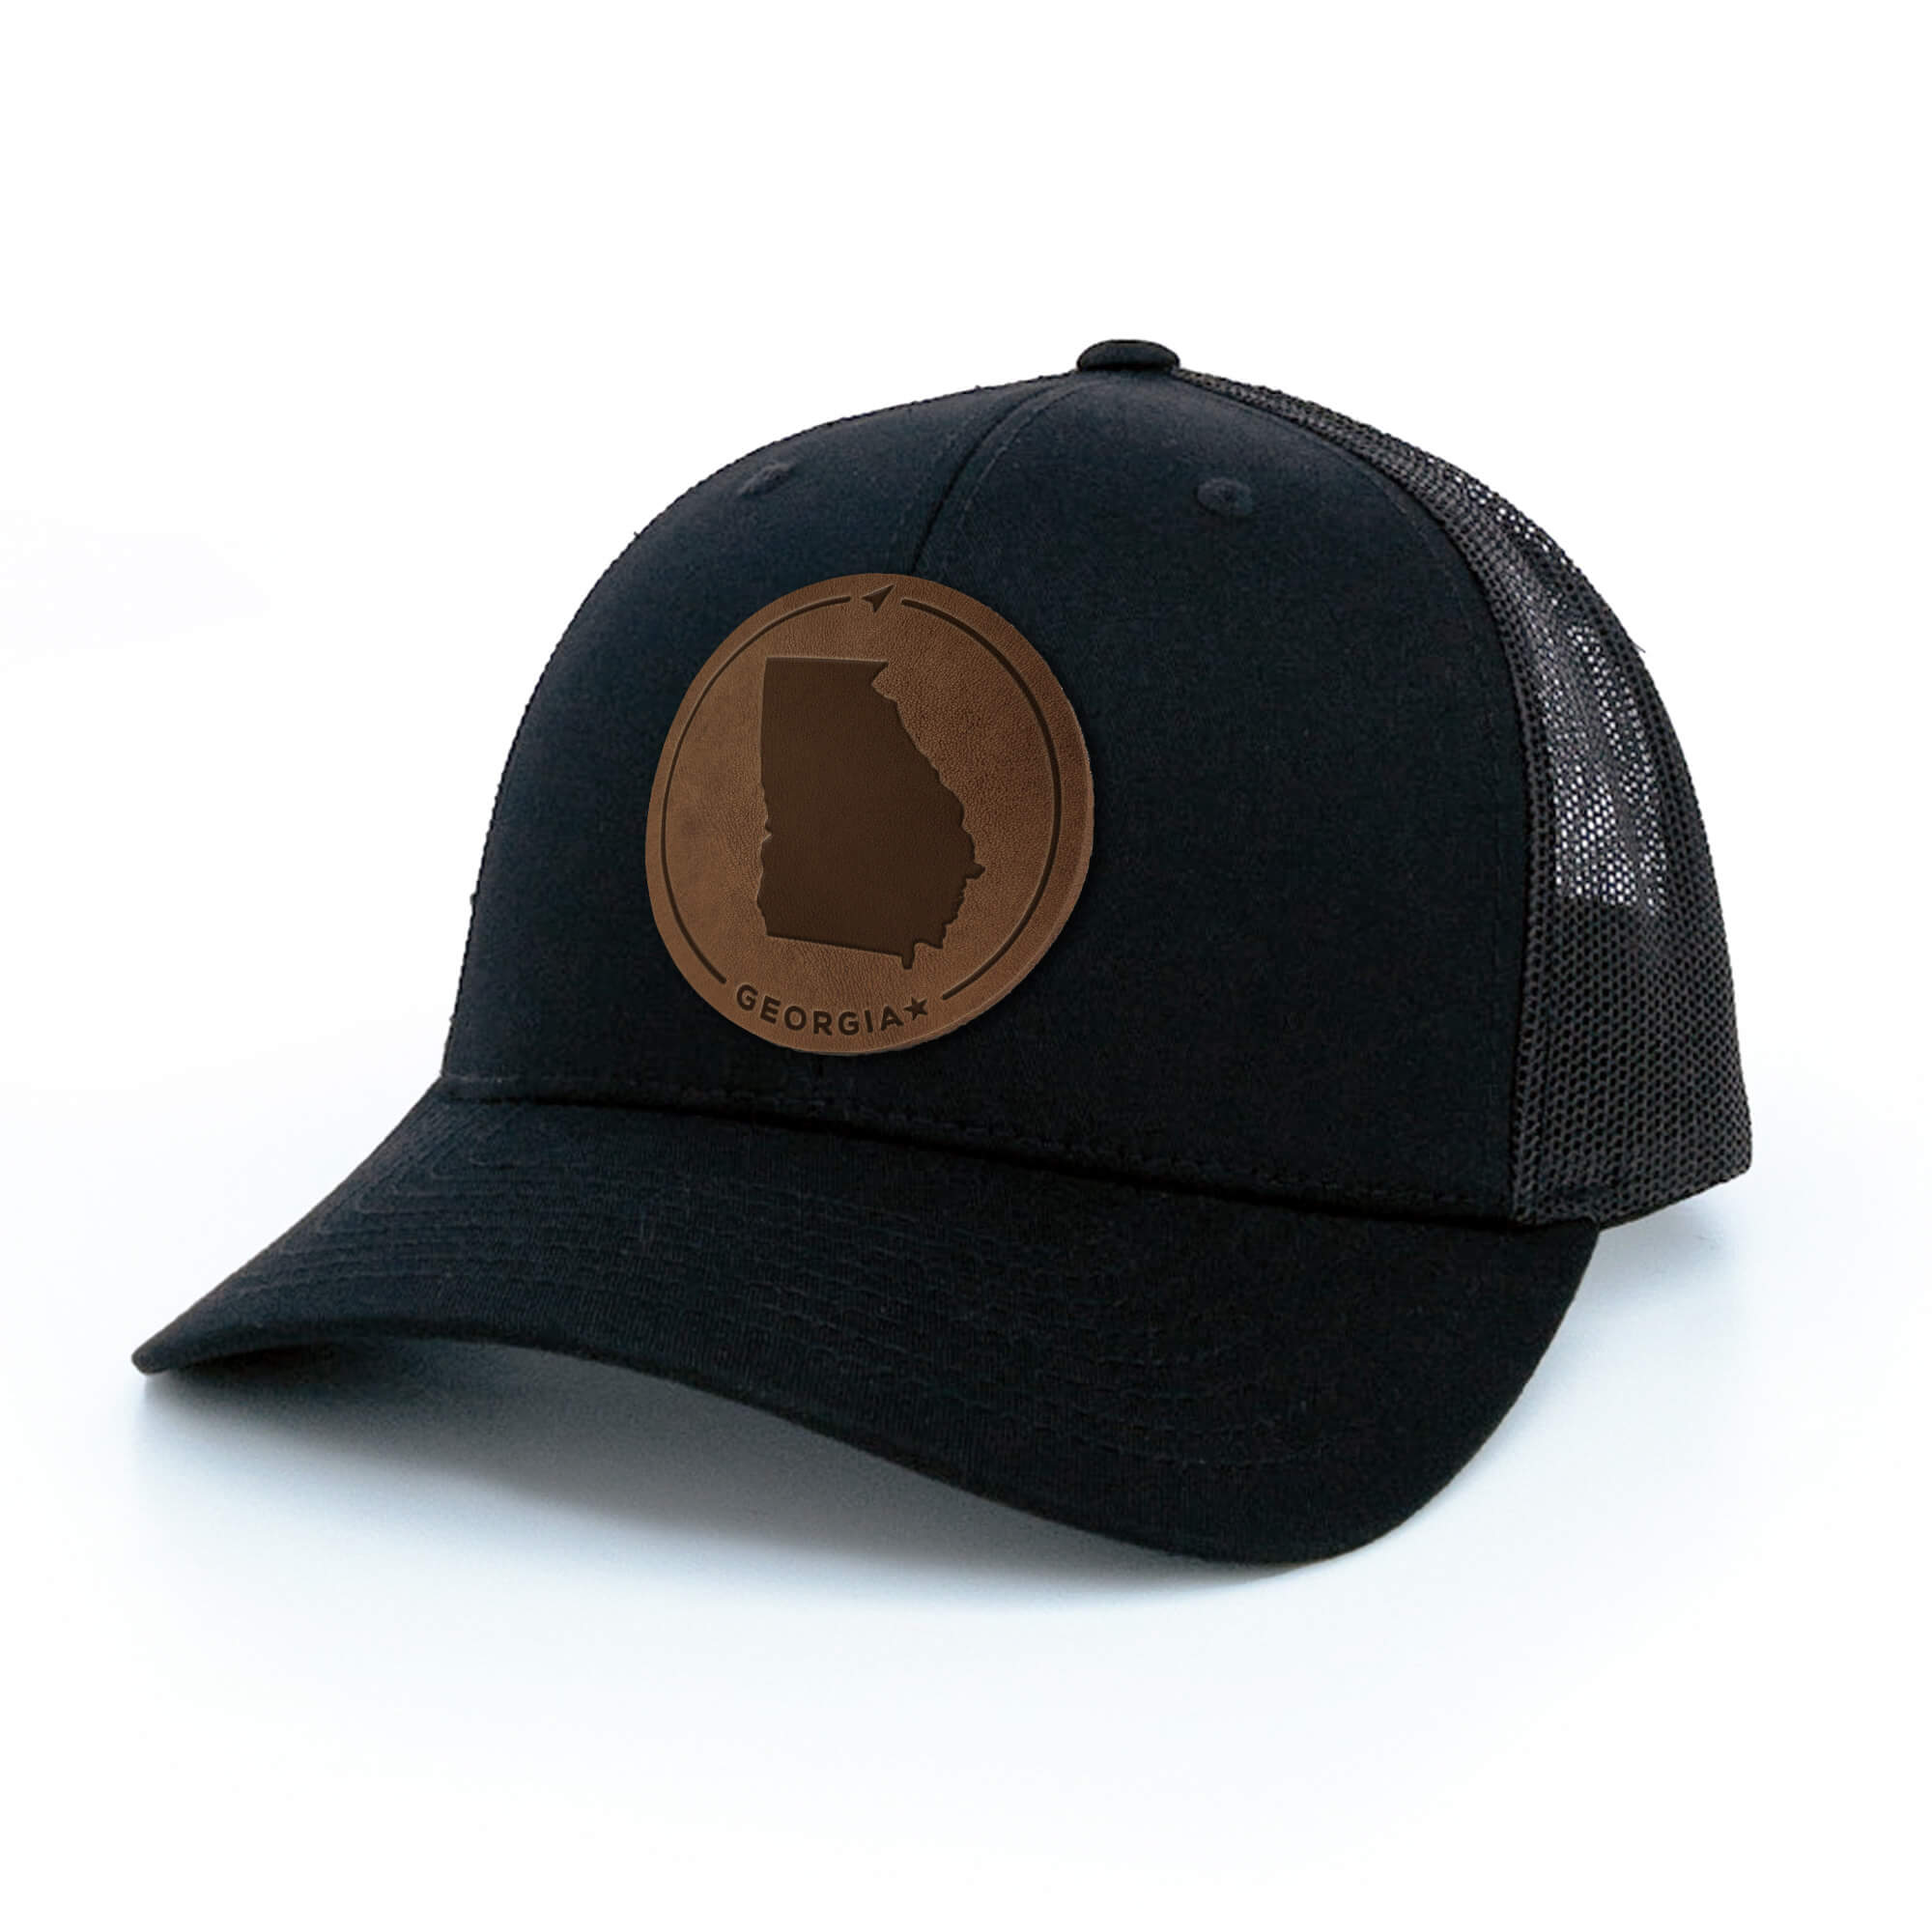 Black trucker hat with full-grain leather patch of Georgia | BLACK-003-009, CHARC-003-009, NAVY-003-009, HGREY-003-009, MOSS-003-009, BROWN-003-009